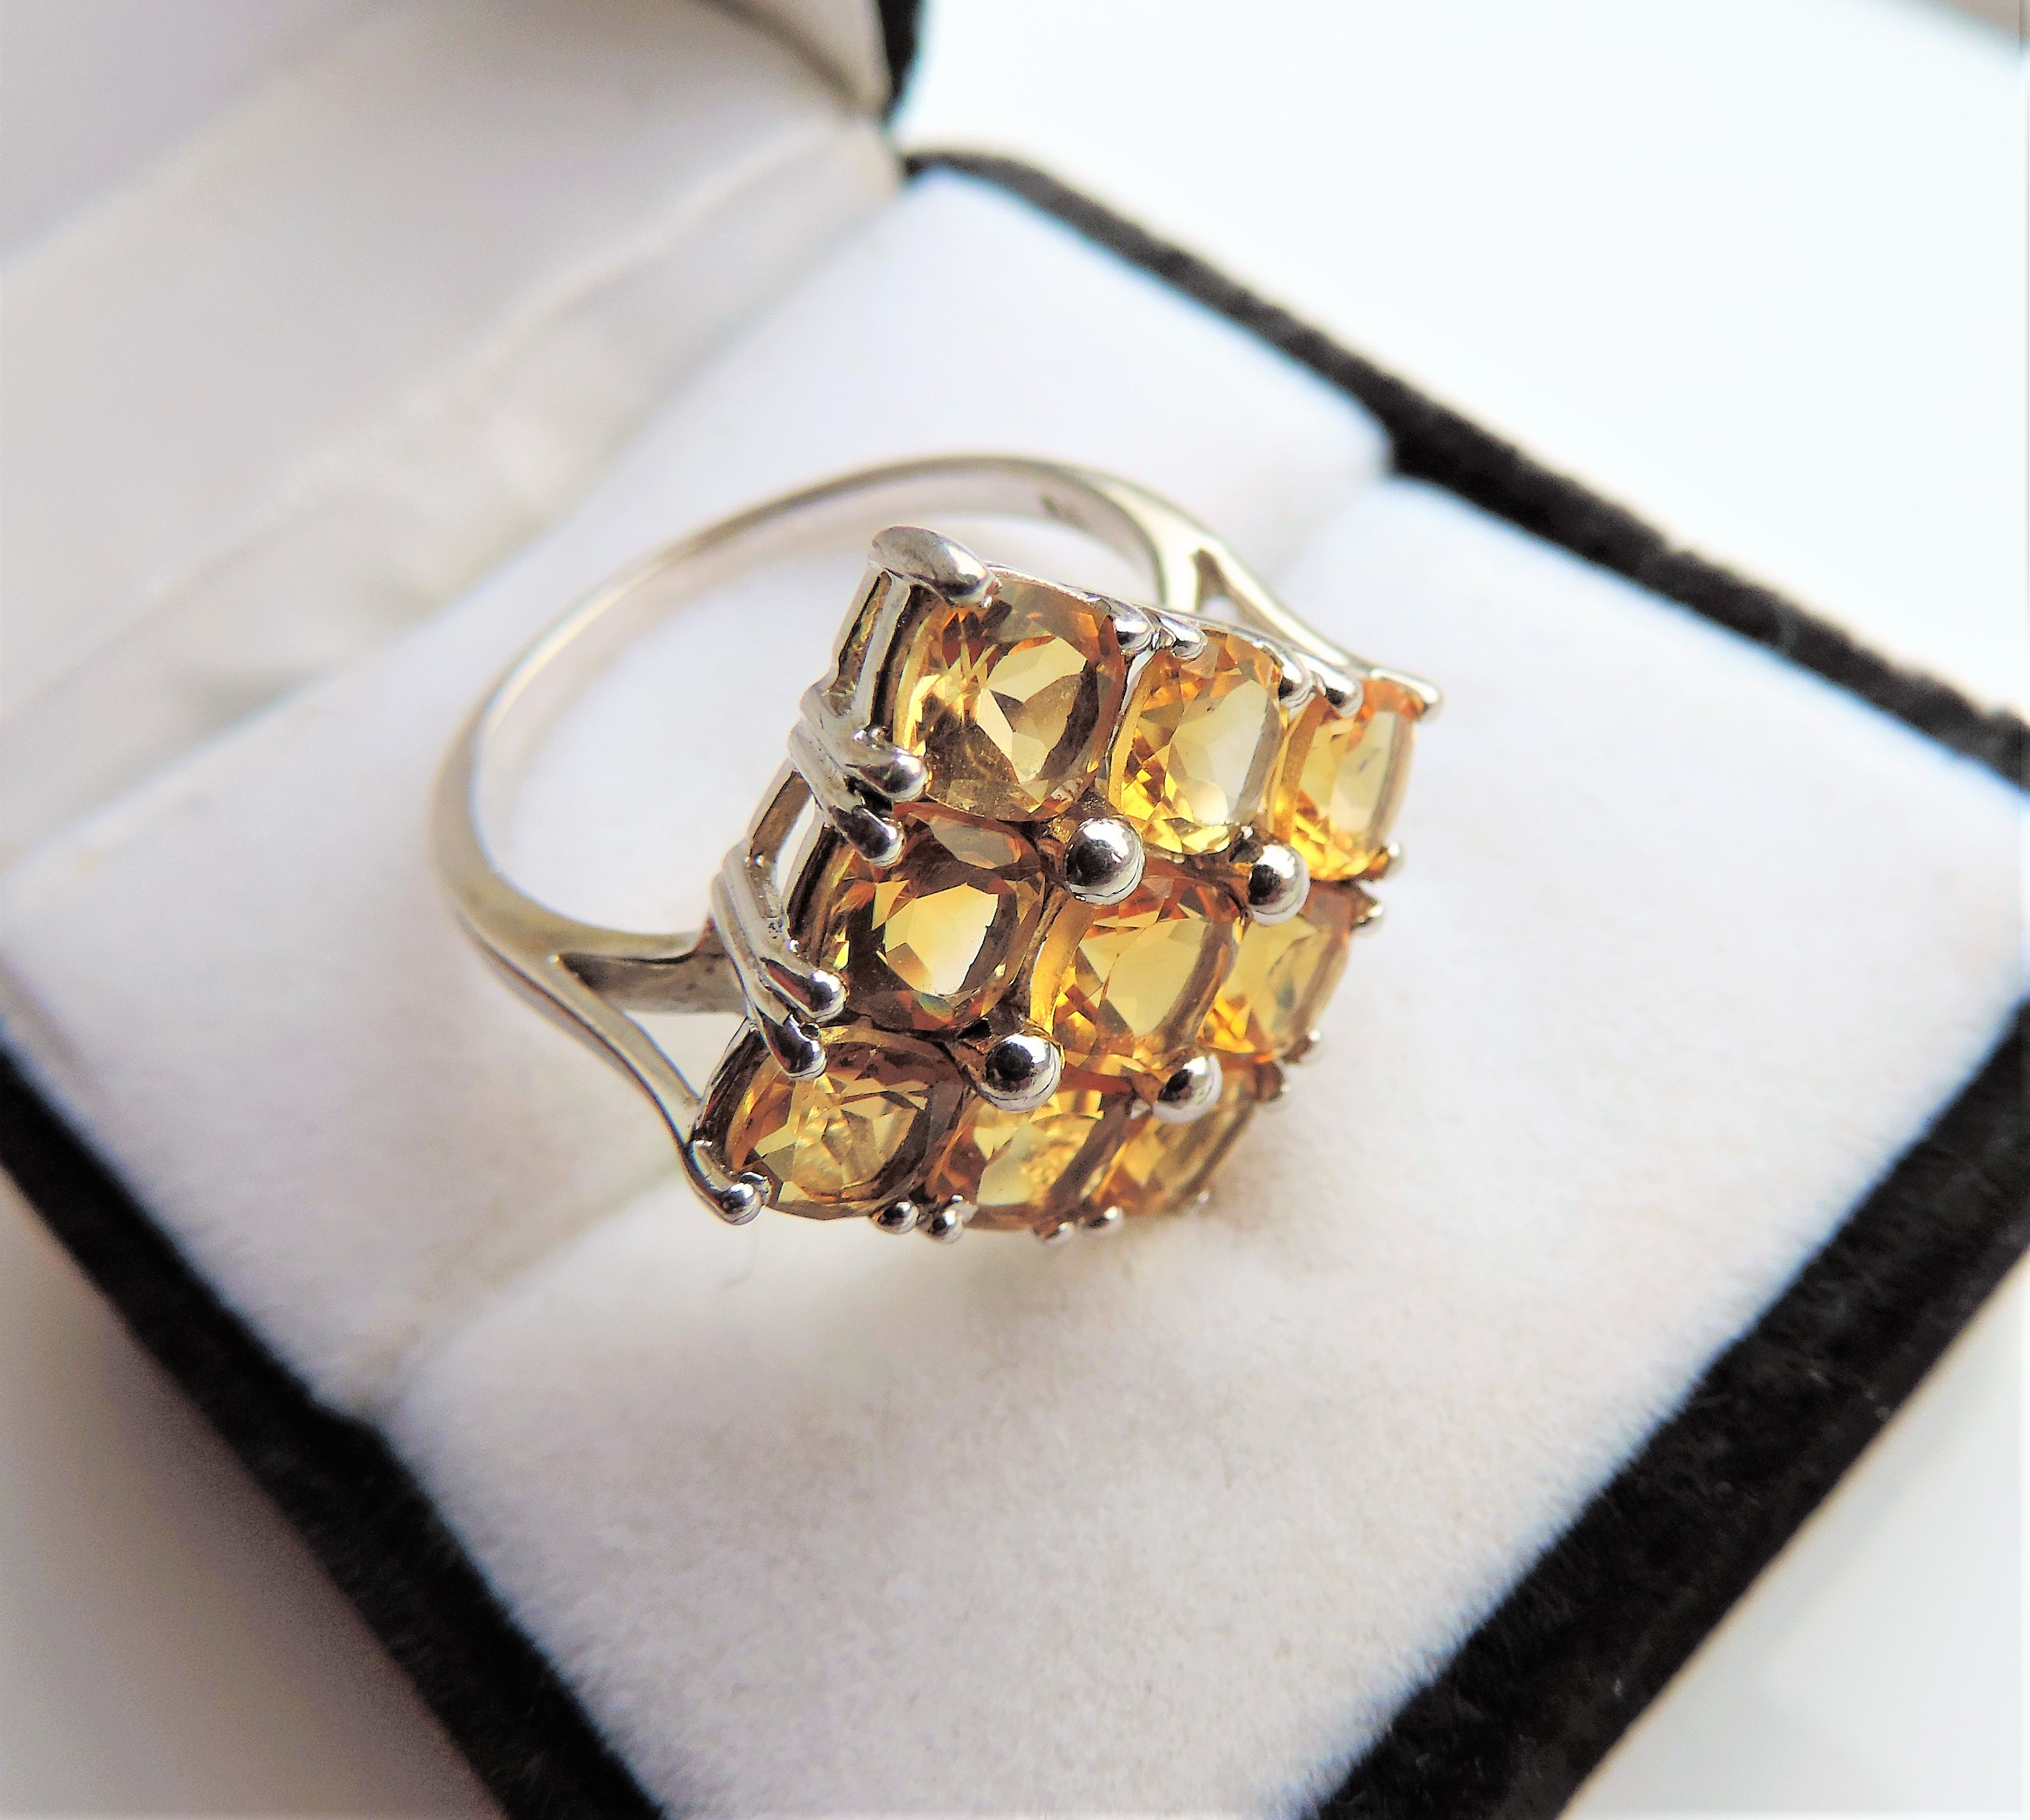 3.6 carat Yellow Sapphire Cluster Ring in Sterling Silver - Image 2 of 3